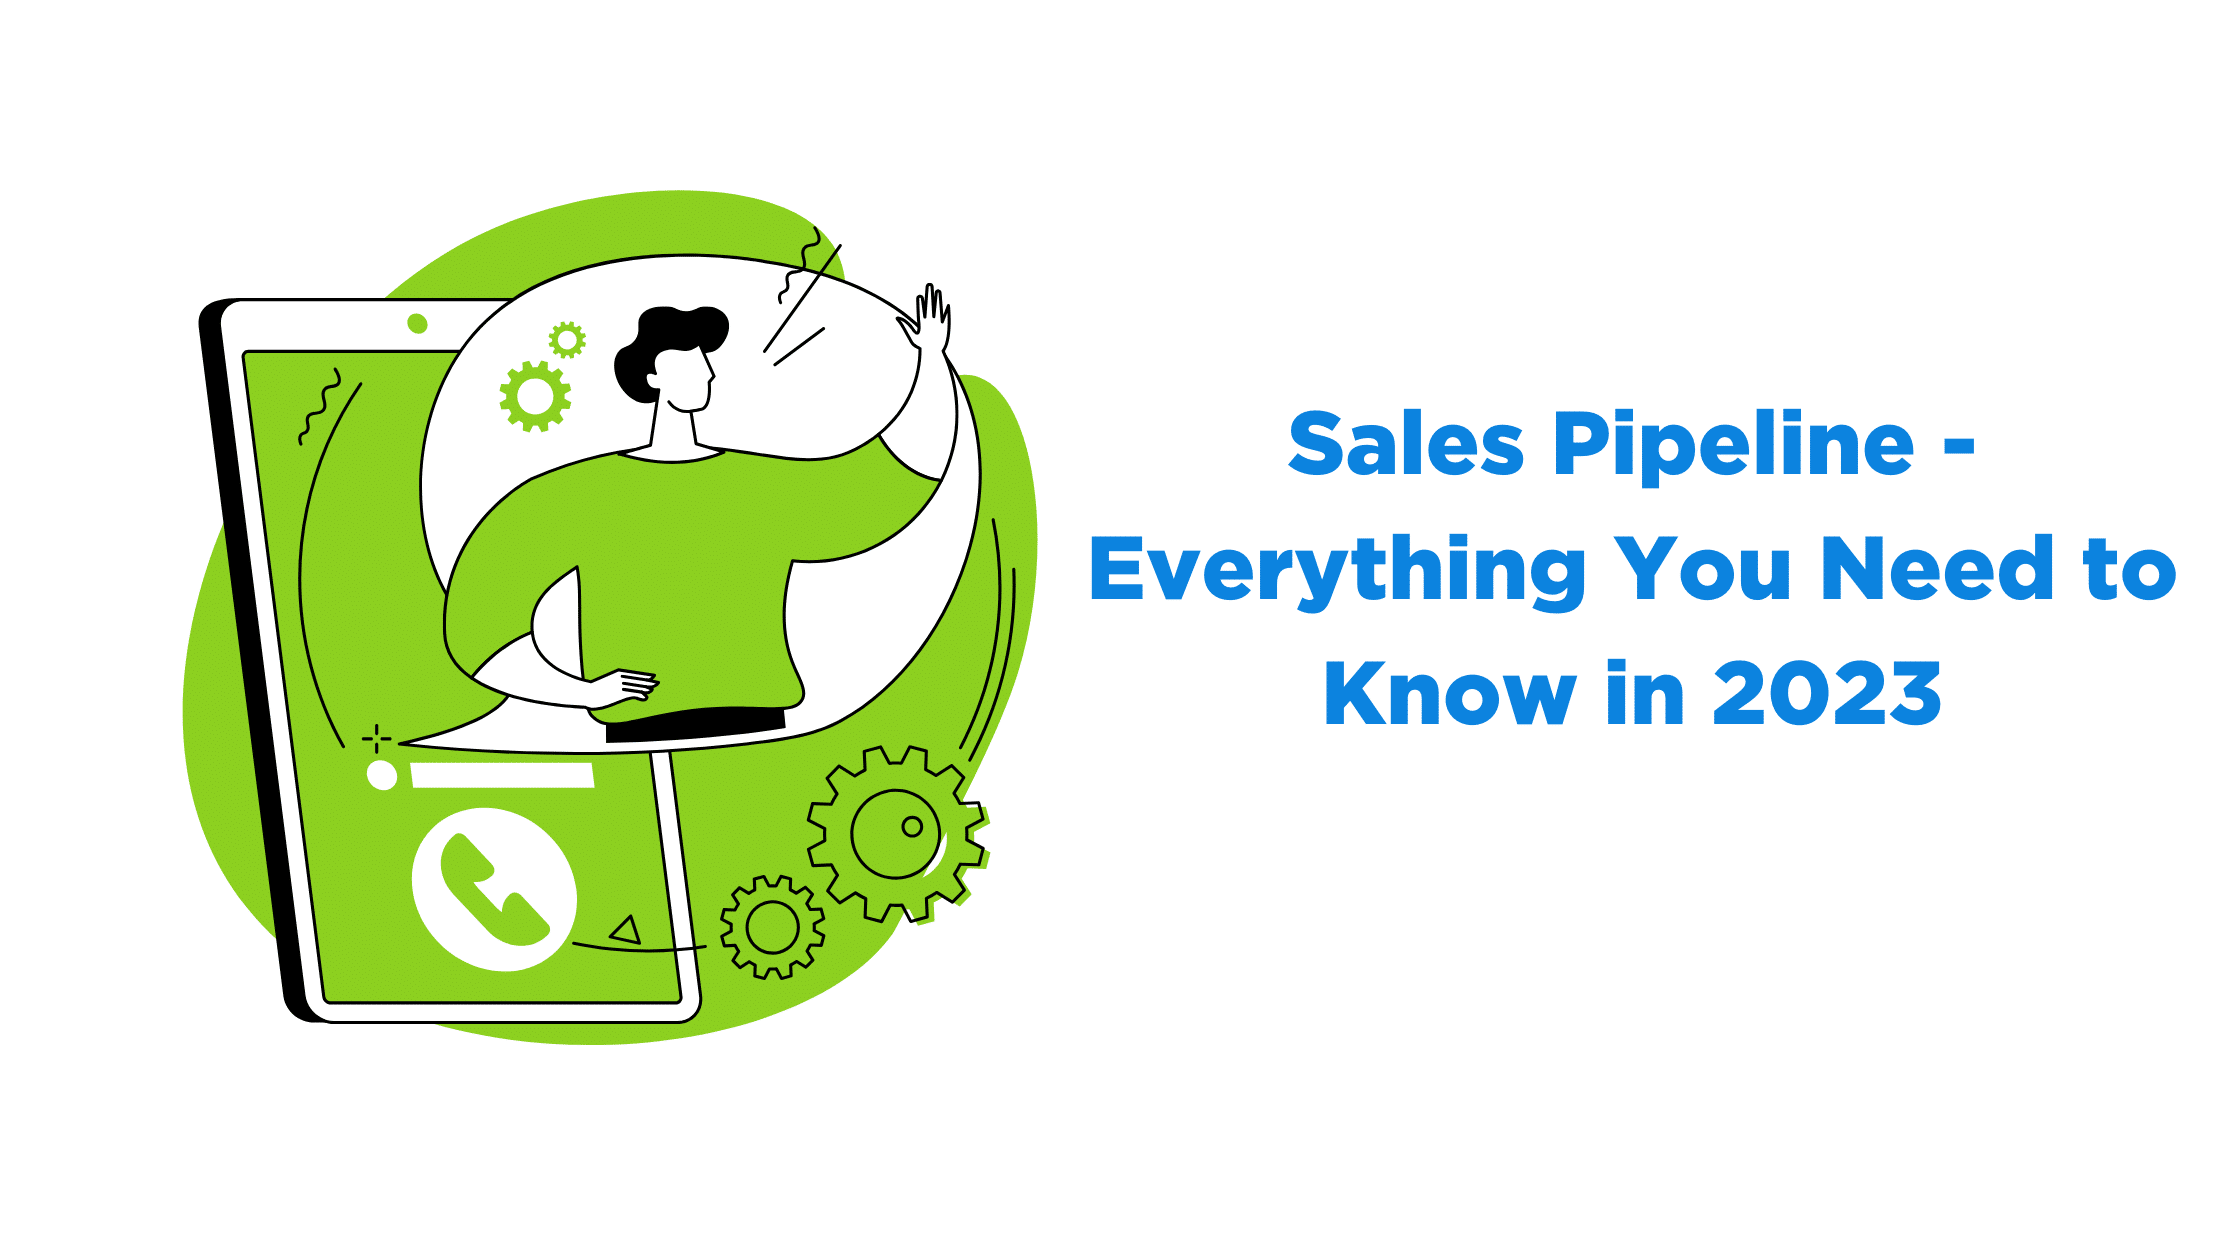 Sales Pipeline - Everything You Need to Know in 2023